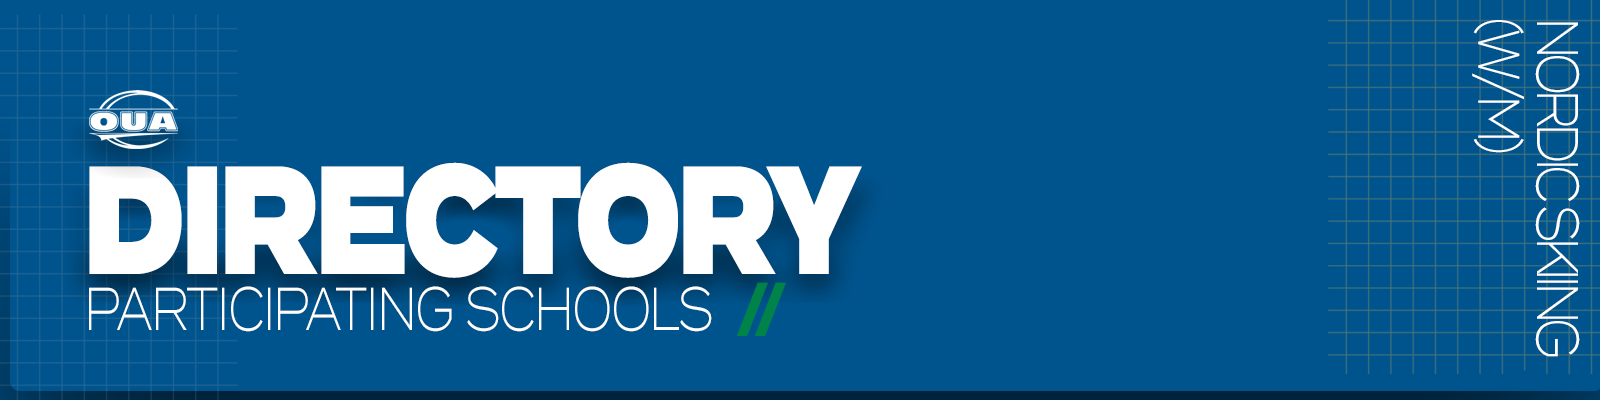 Predominantly blue graphic with large white text on the left side that reads 'Directory, Participating Schools' and small white vertical text on the right side that reads 'Nordic Skiing'